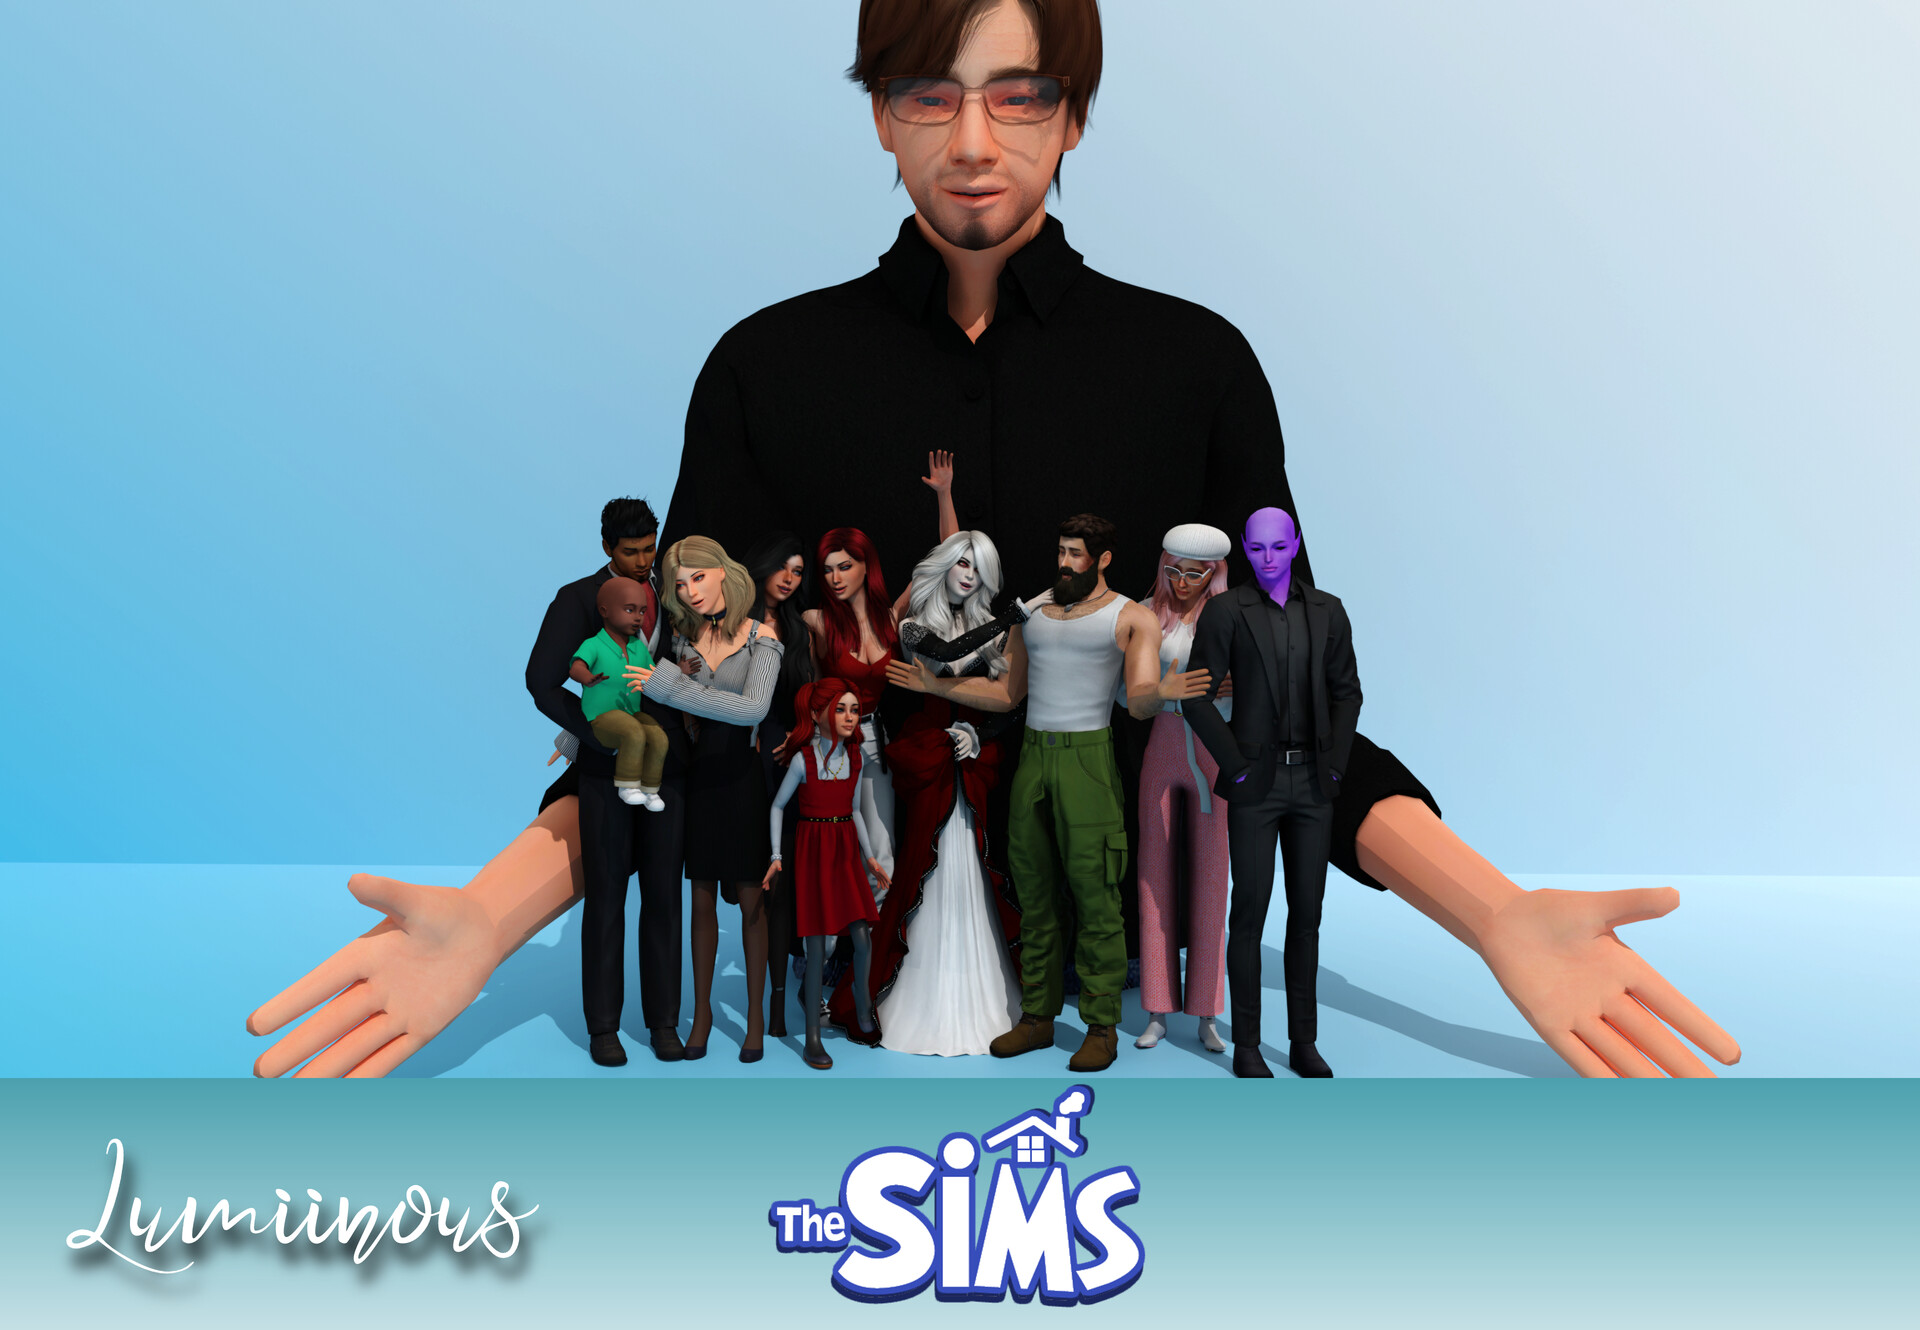 33+ Heartwarming Sims 4 Family Poses You Should Try - We Want Mods